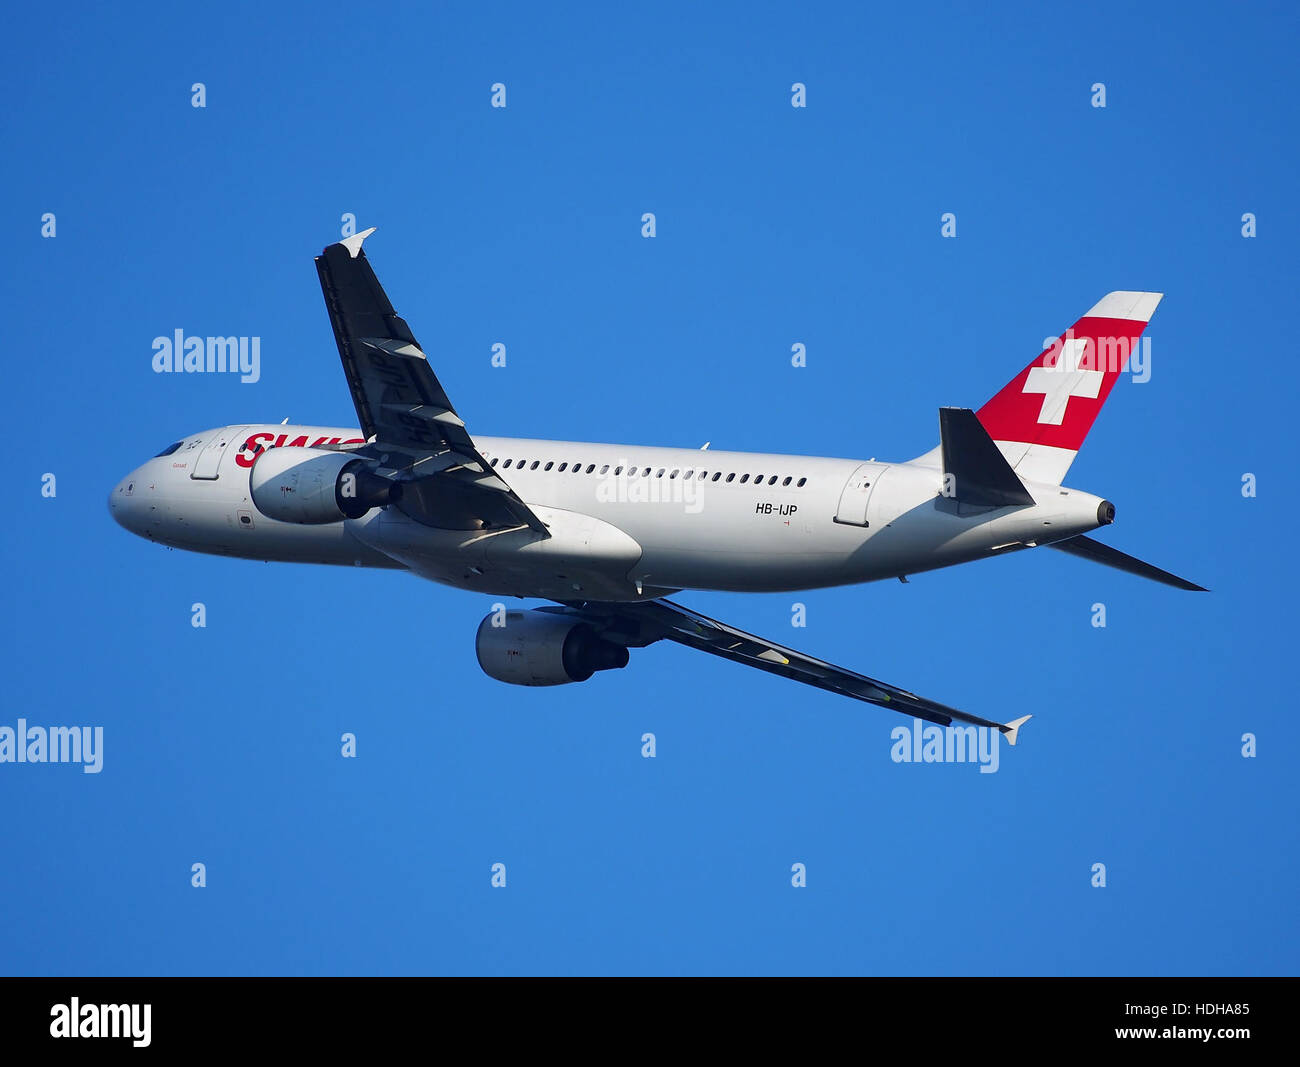 HB-IJP - Airbus A320-214 - Swiss takeoff from Schiphol runway 36C pic3 Stock Photo